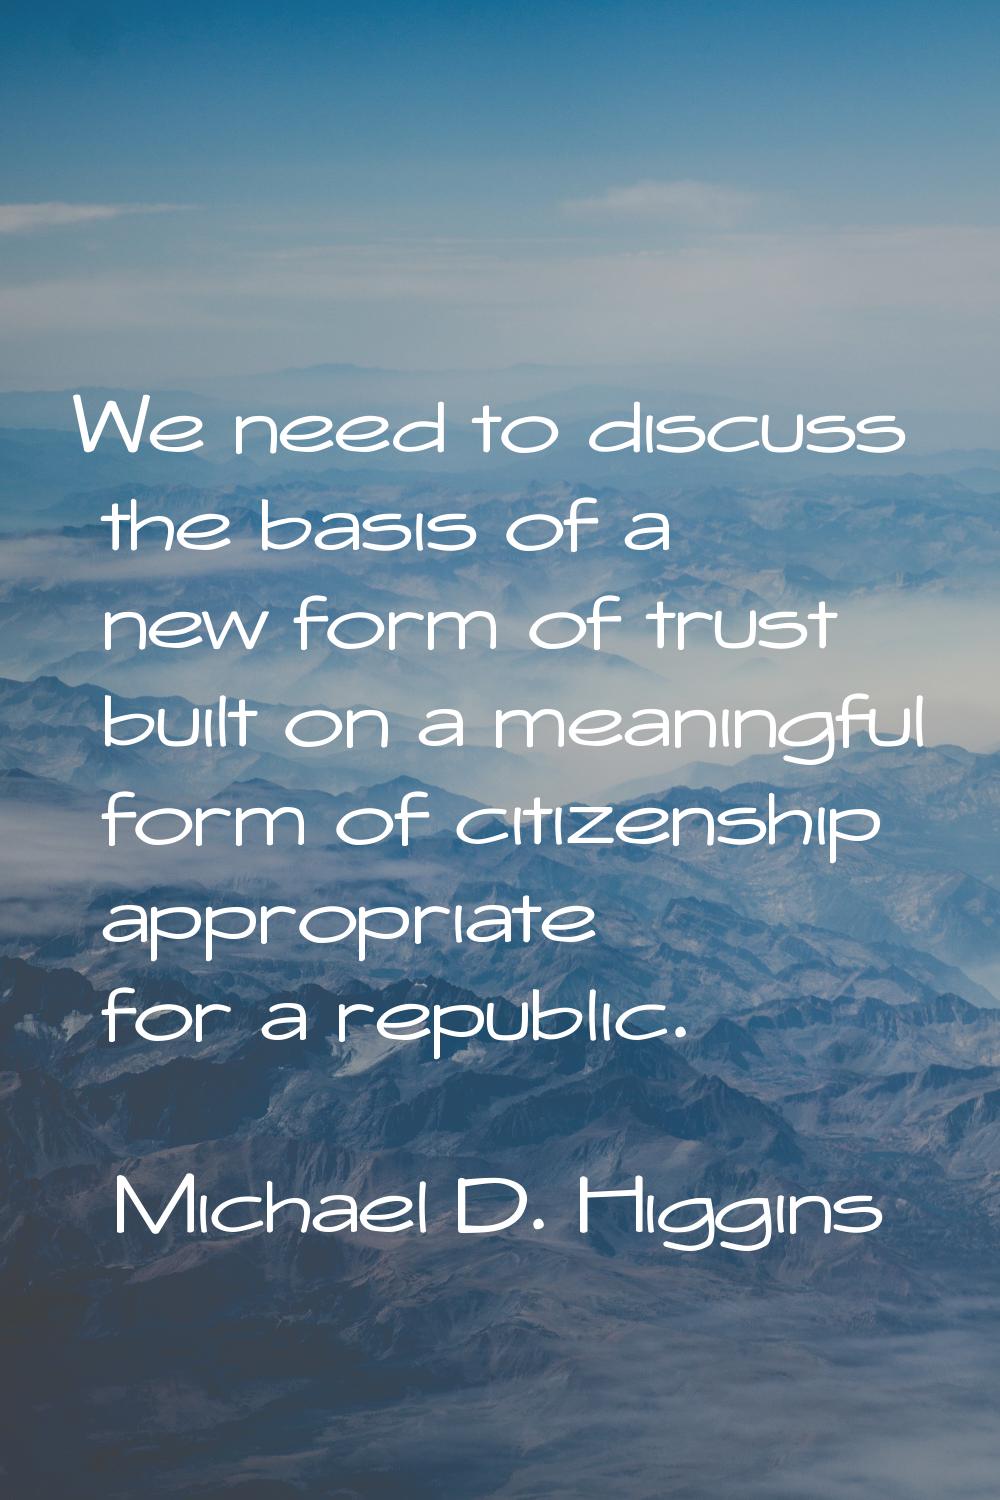 We need to discuss the basis of a new form of trust built on a meaningful form of citizenship appro